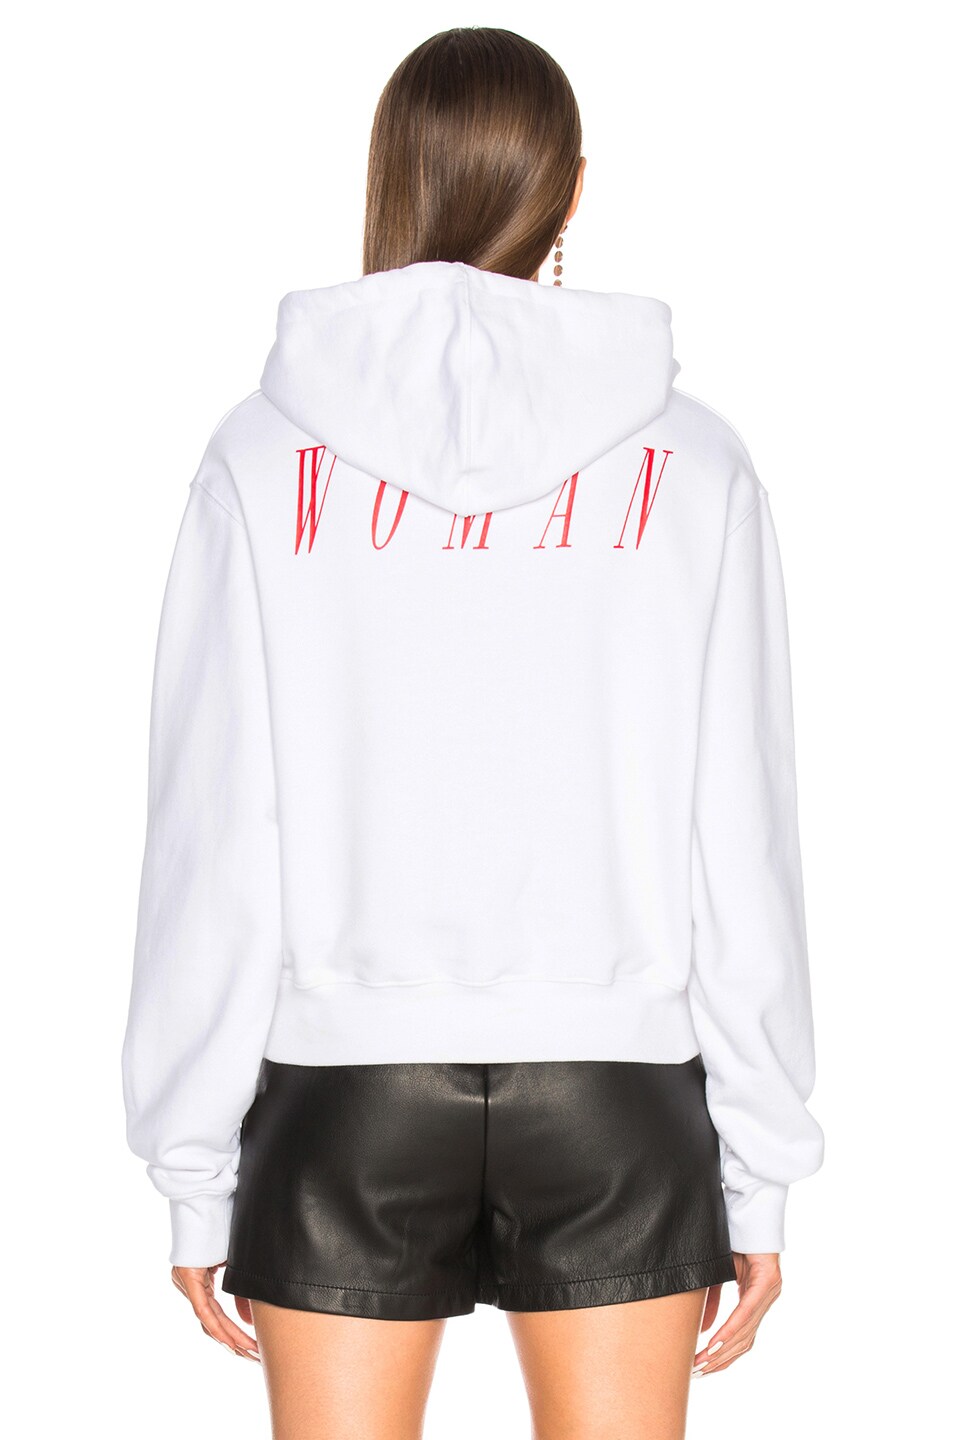 OFF-WHITE Cropped Hoodie in White & Red | FWRD